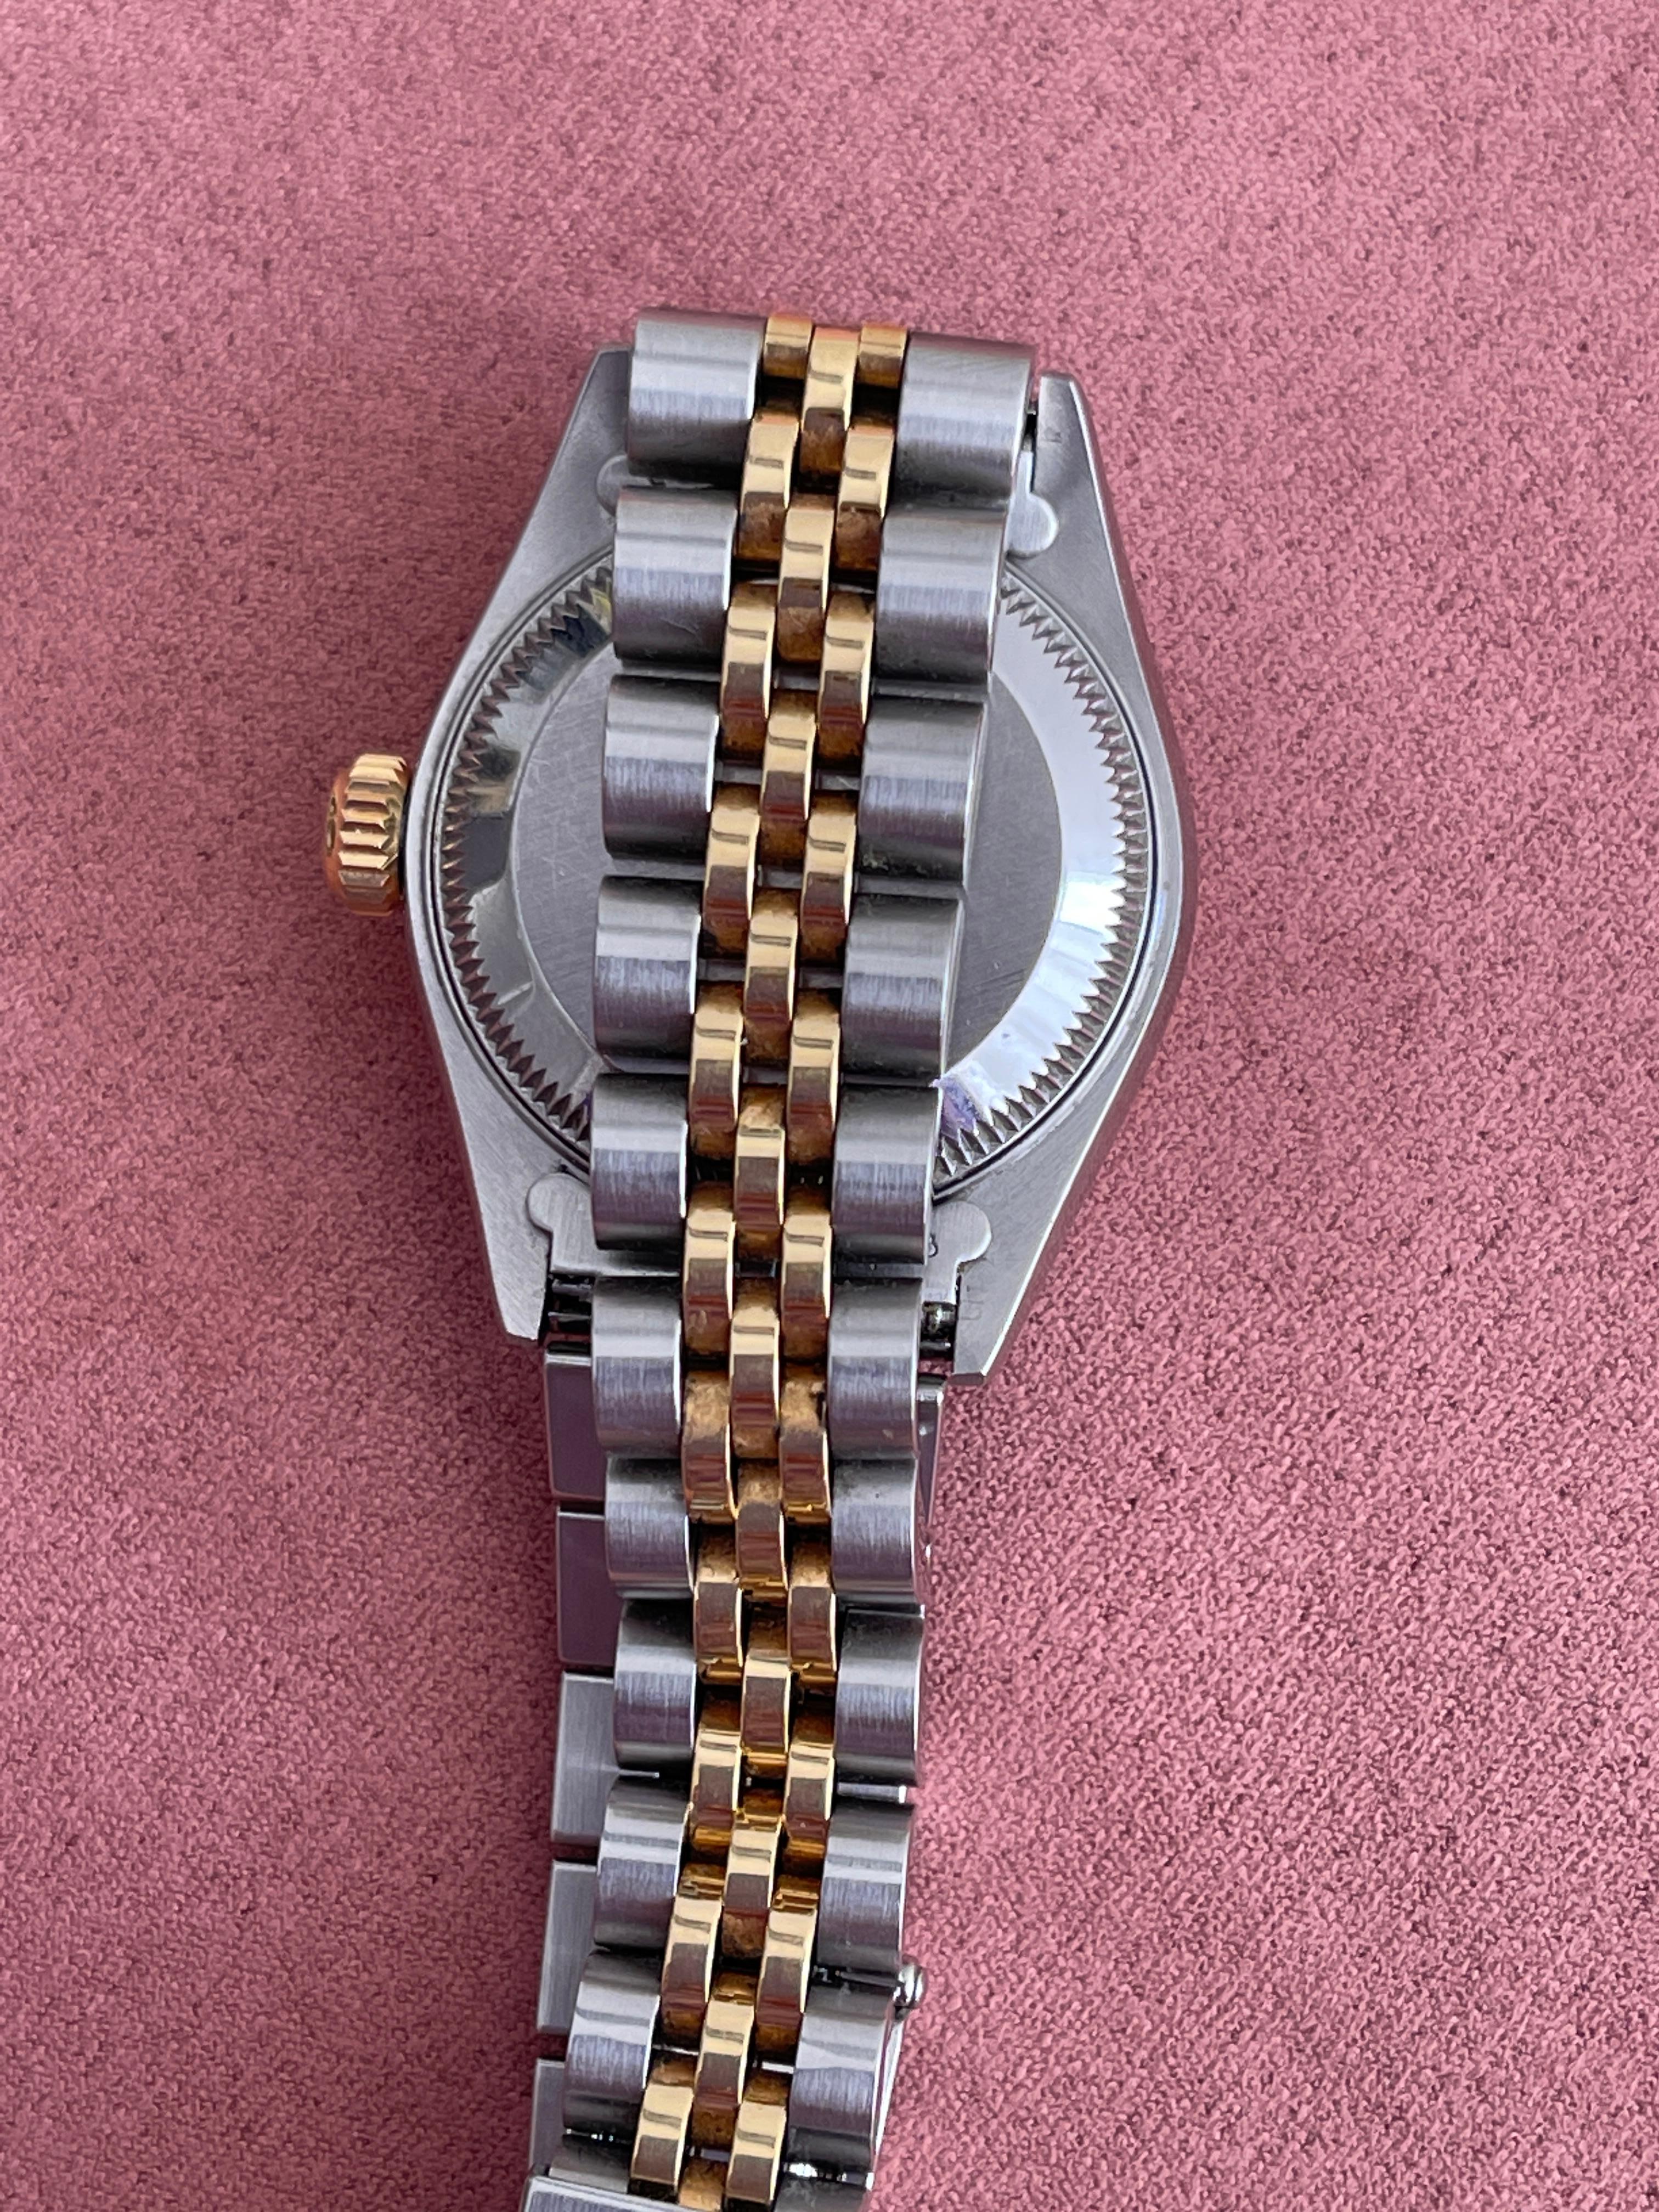 Rolex lady datejust 26mm two tone diamond face In Excellent Condition For Sale In SOUTH YARRA, VIC